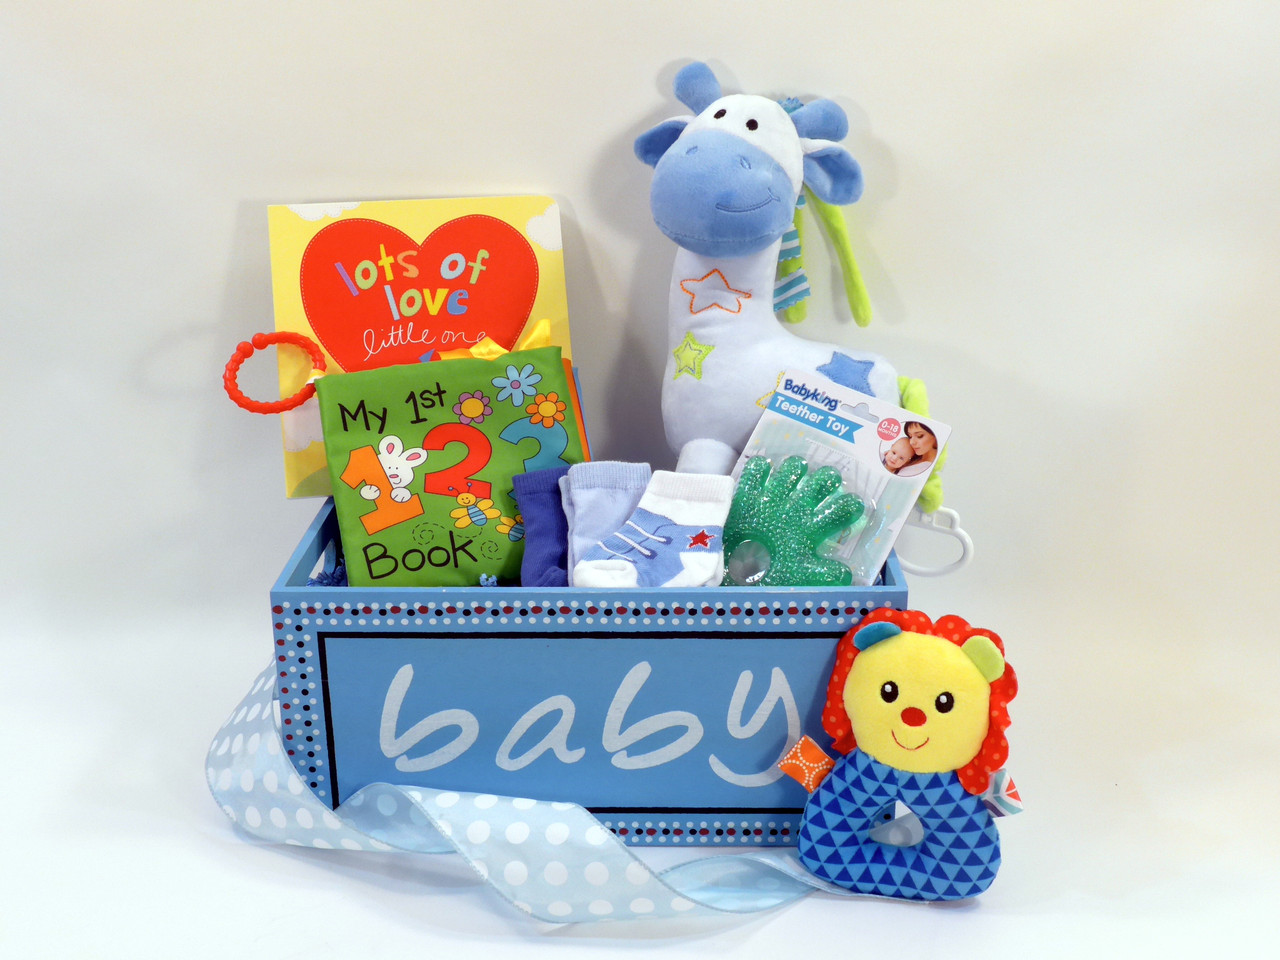 Baby Shower Baskets, baby shower, gifts for mom, mom to be gift, baby boy,  baby boy gift, thoughtful gifts, shower gifts, gifts for baby